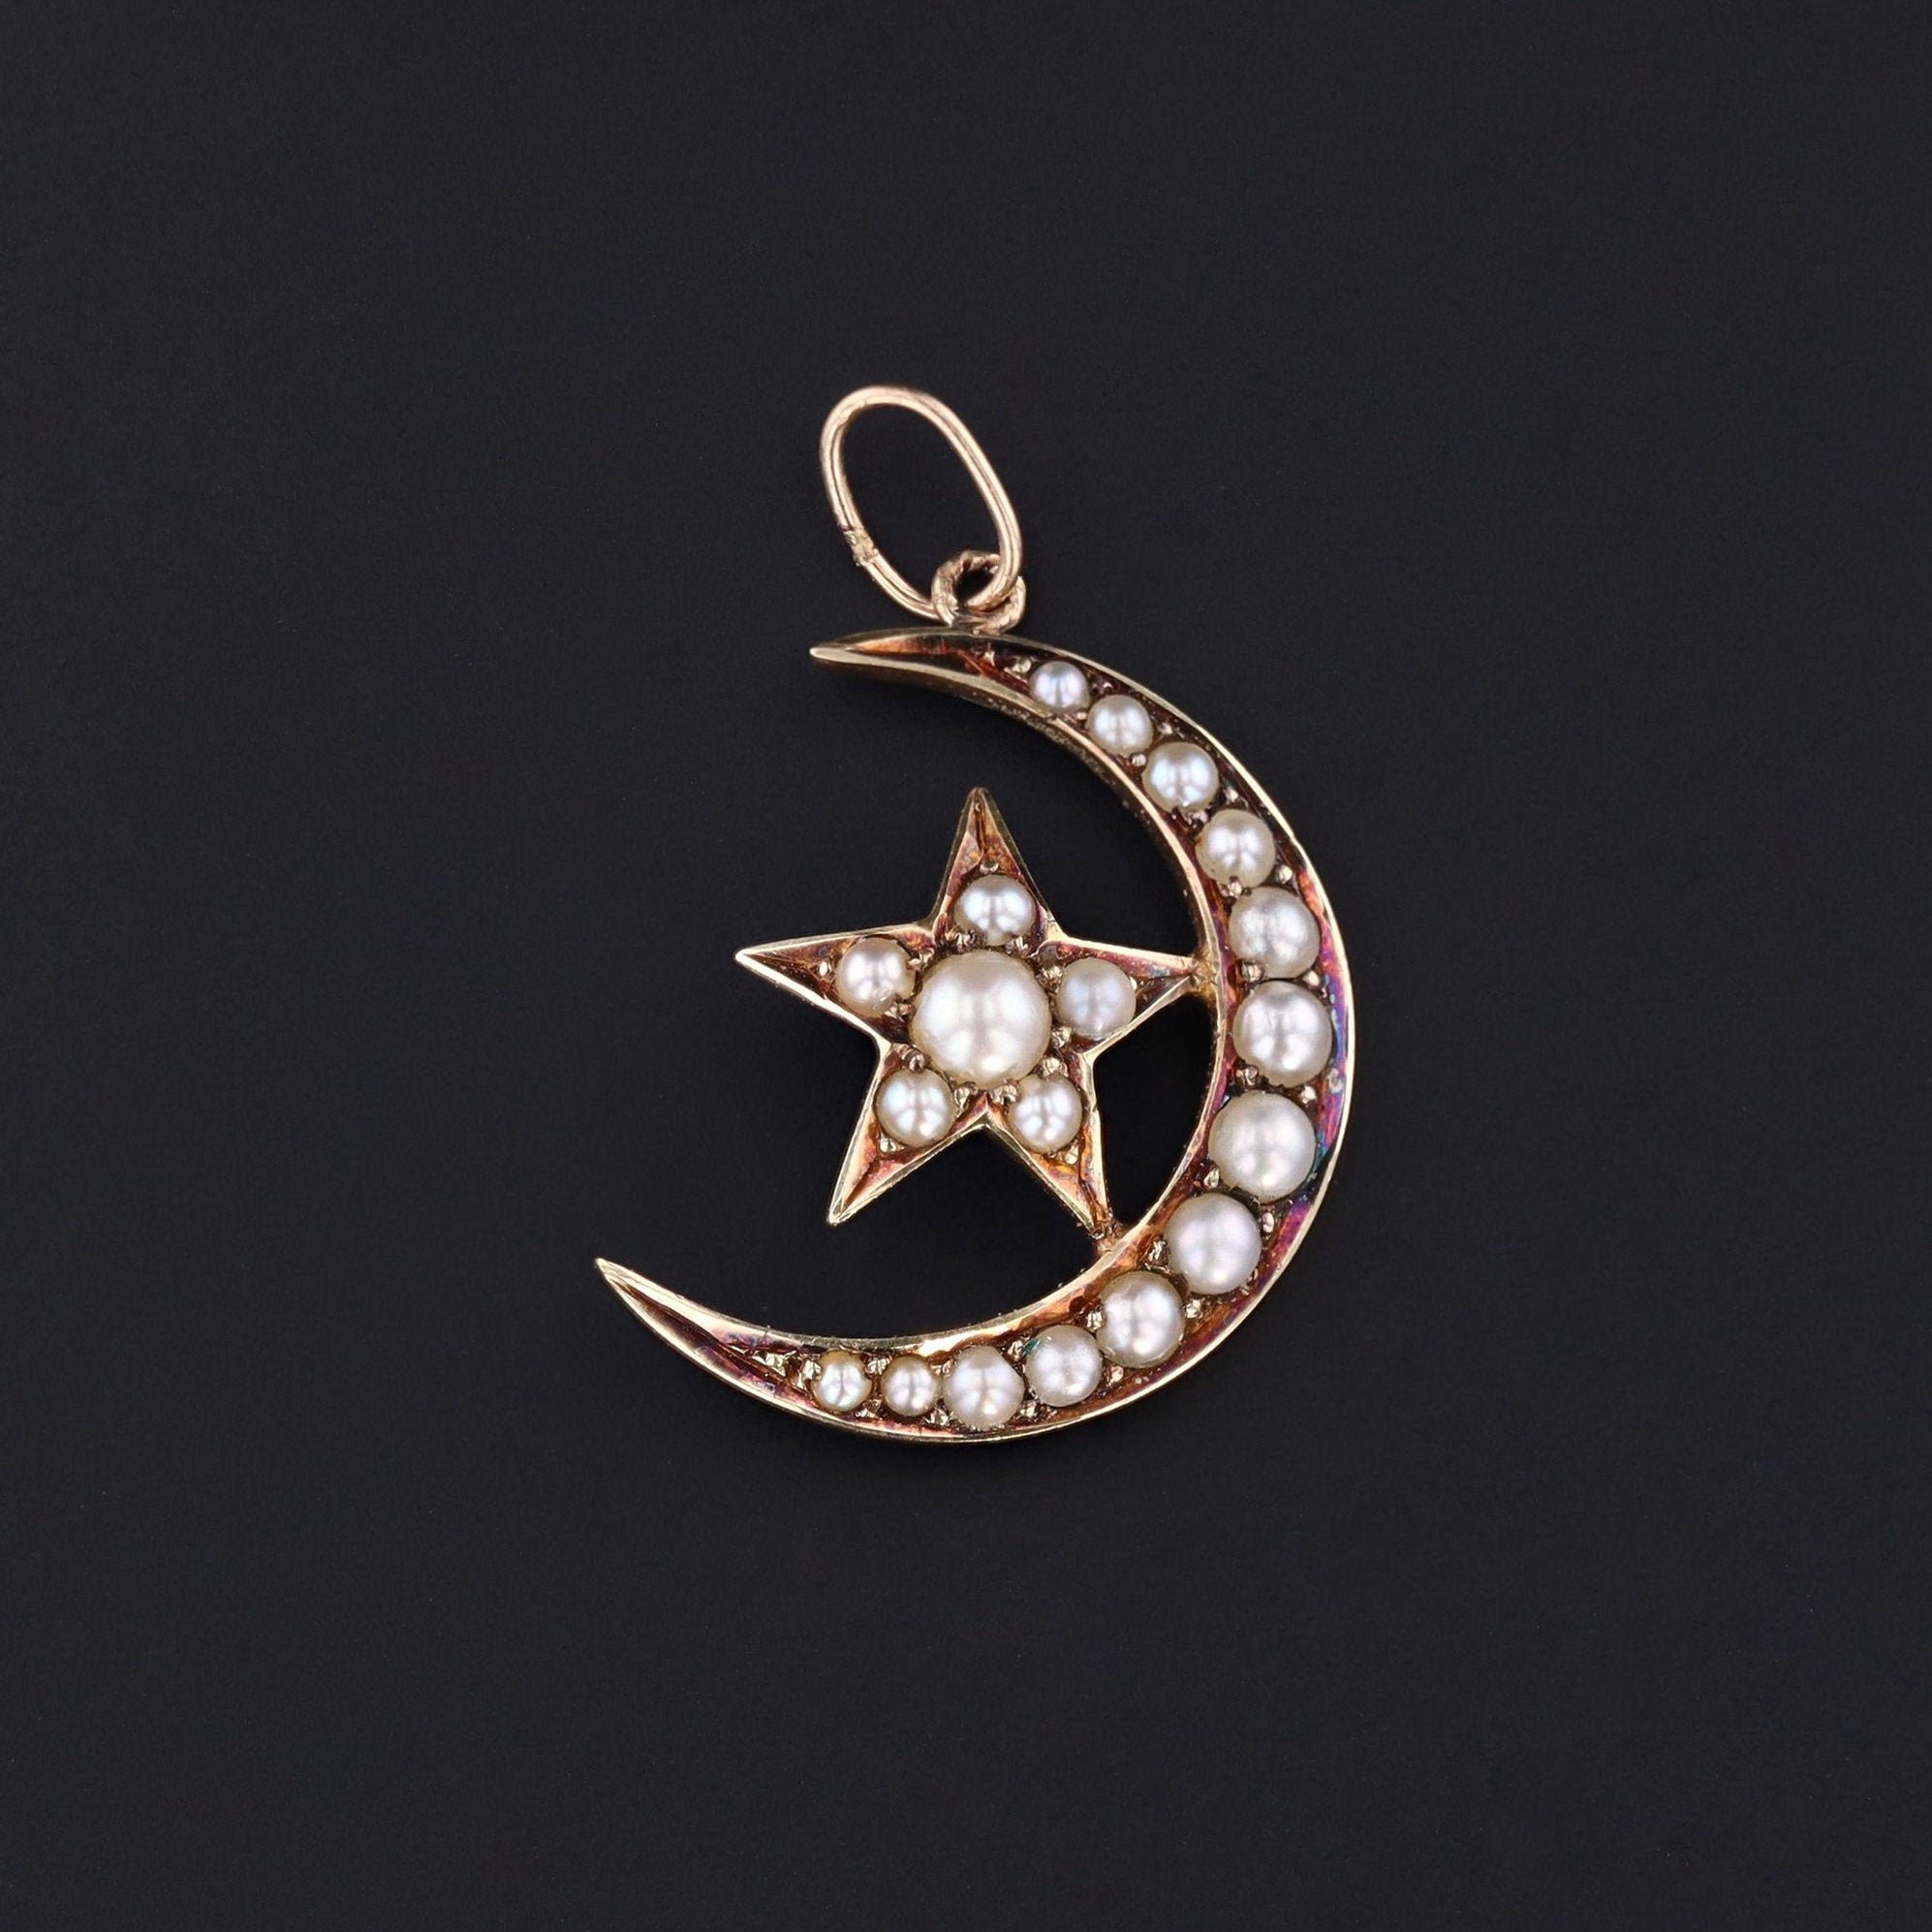 Pearl Crescent Moon and Star Pendant | Antique Pin Conversion Pendant 